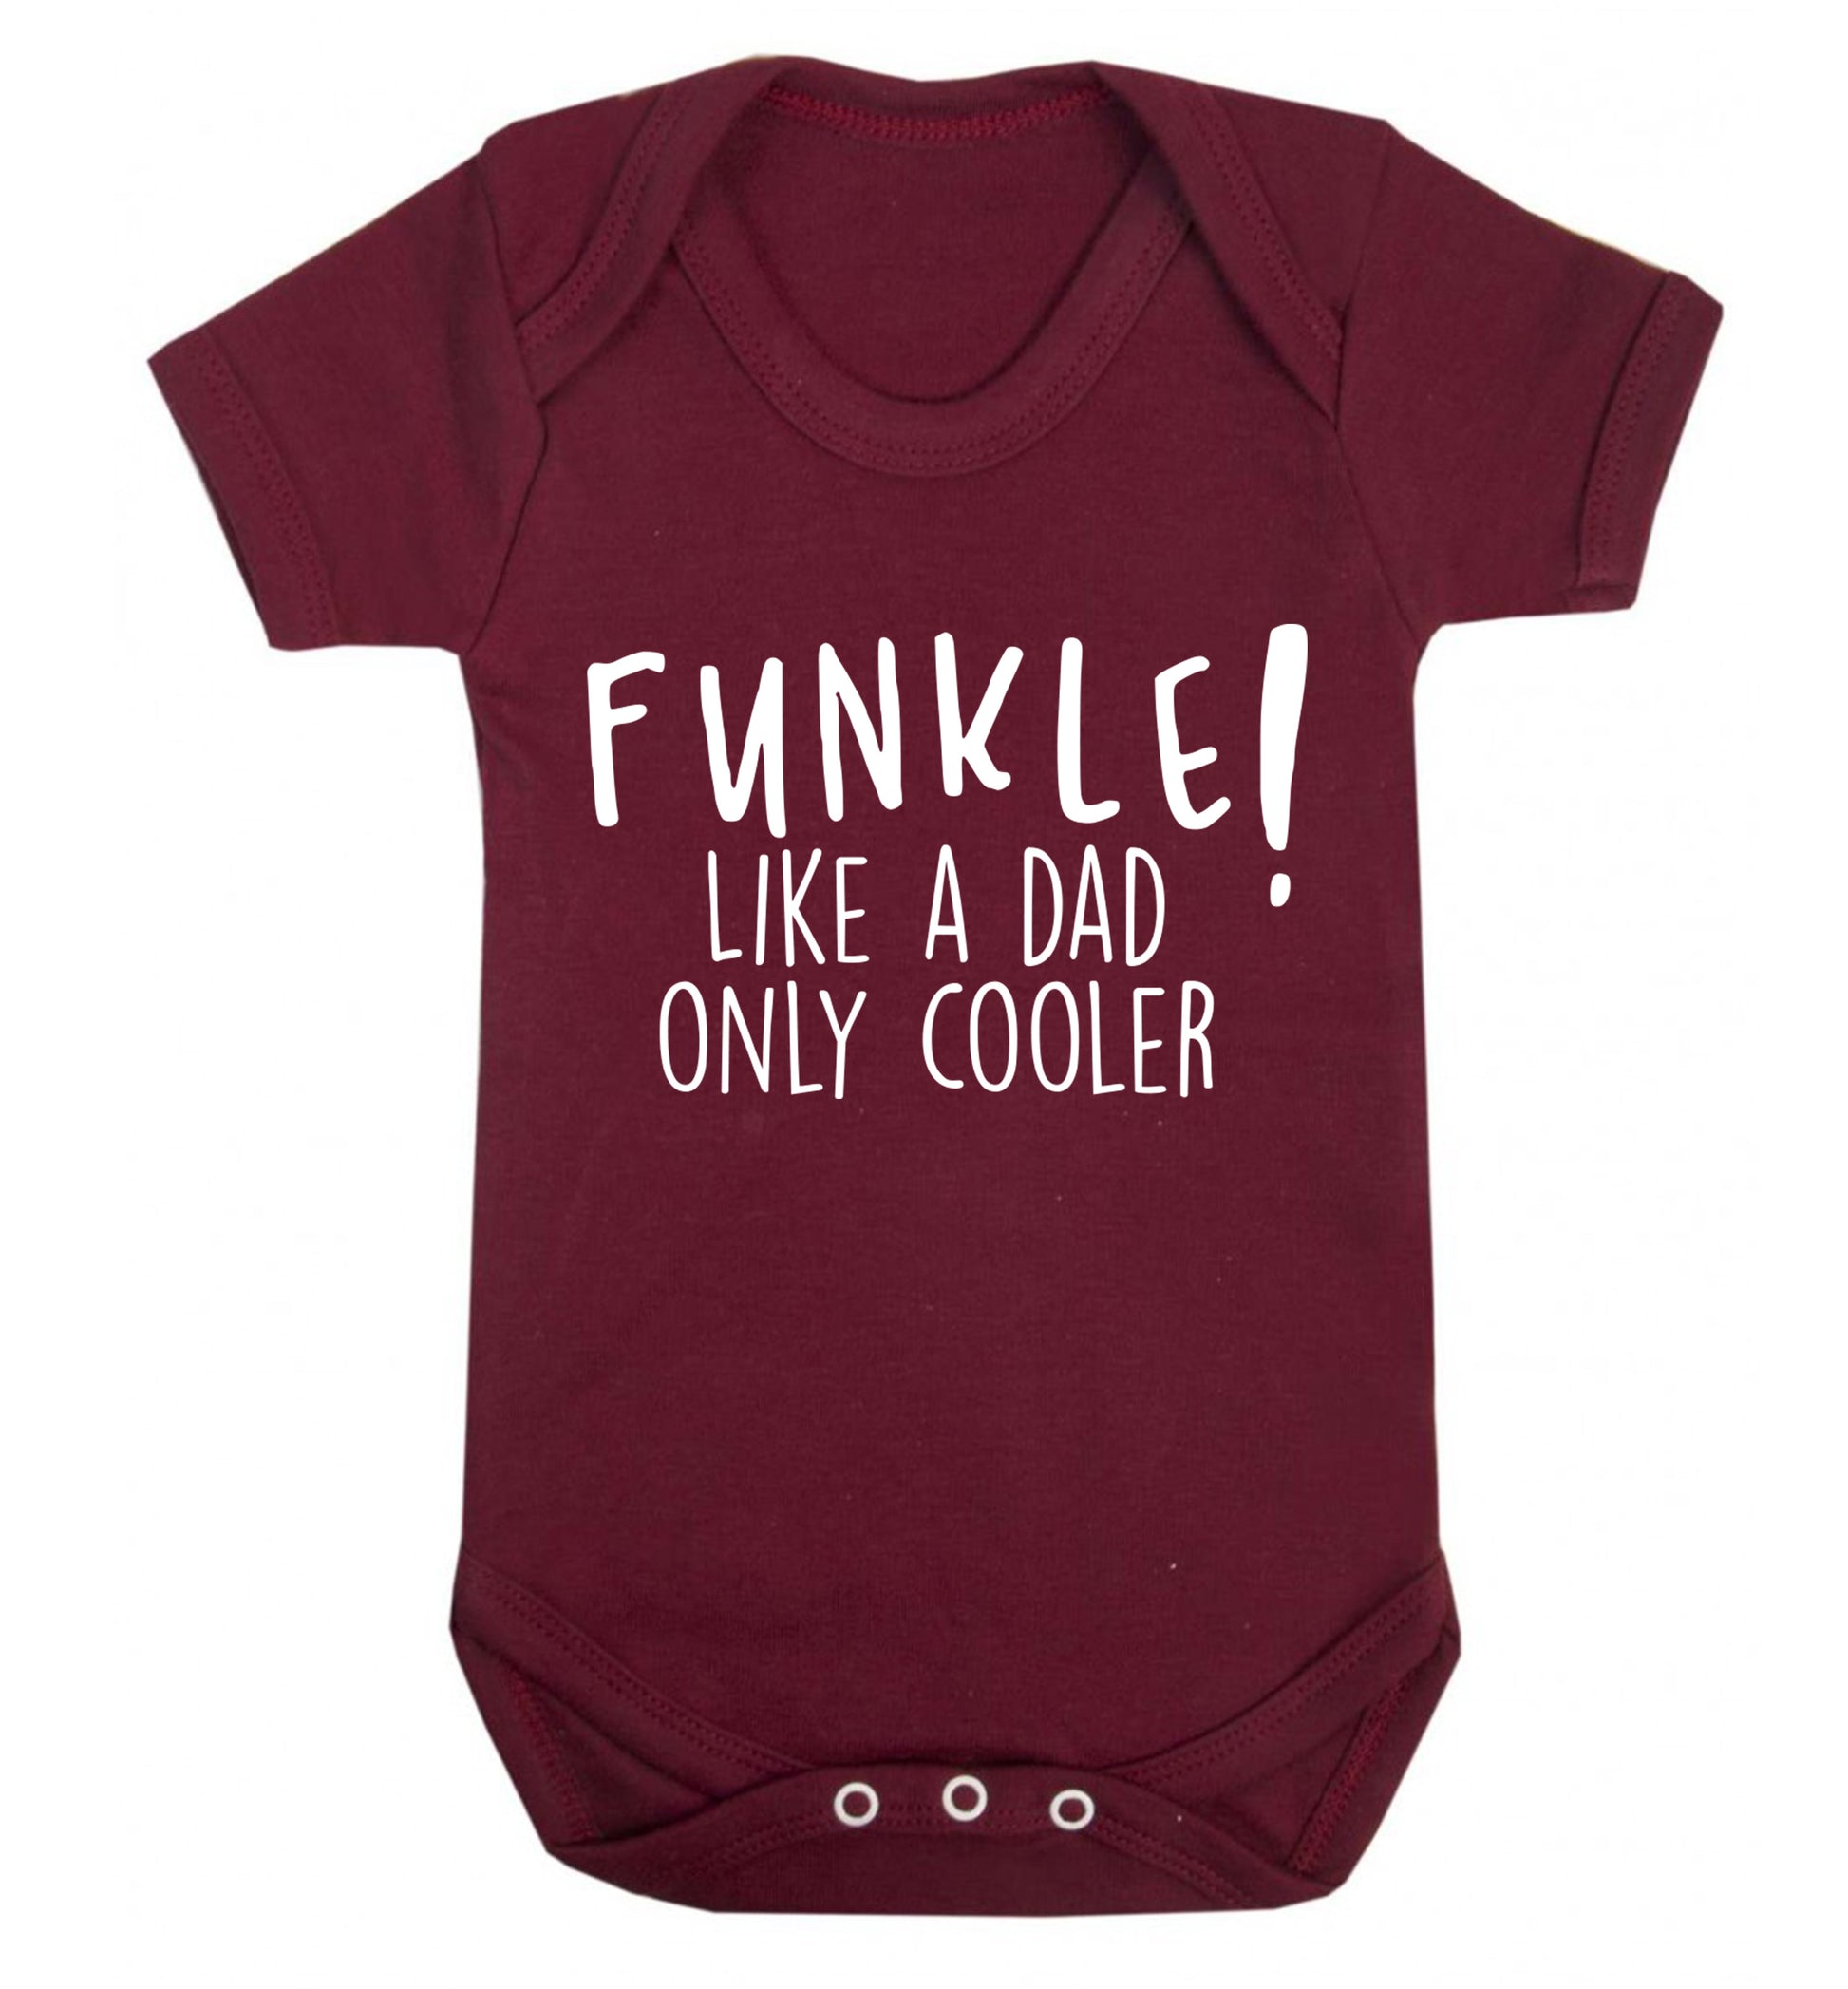 Funkle Like a Dad Only Cooler Baby Vest maroon 18-24 months